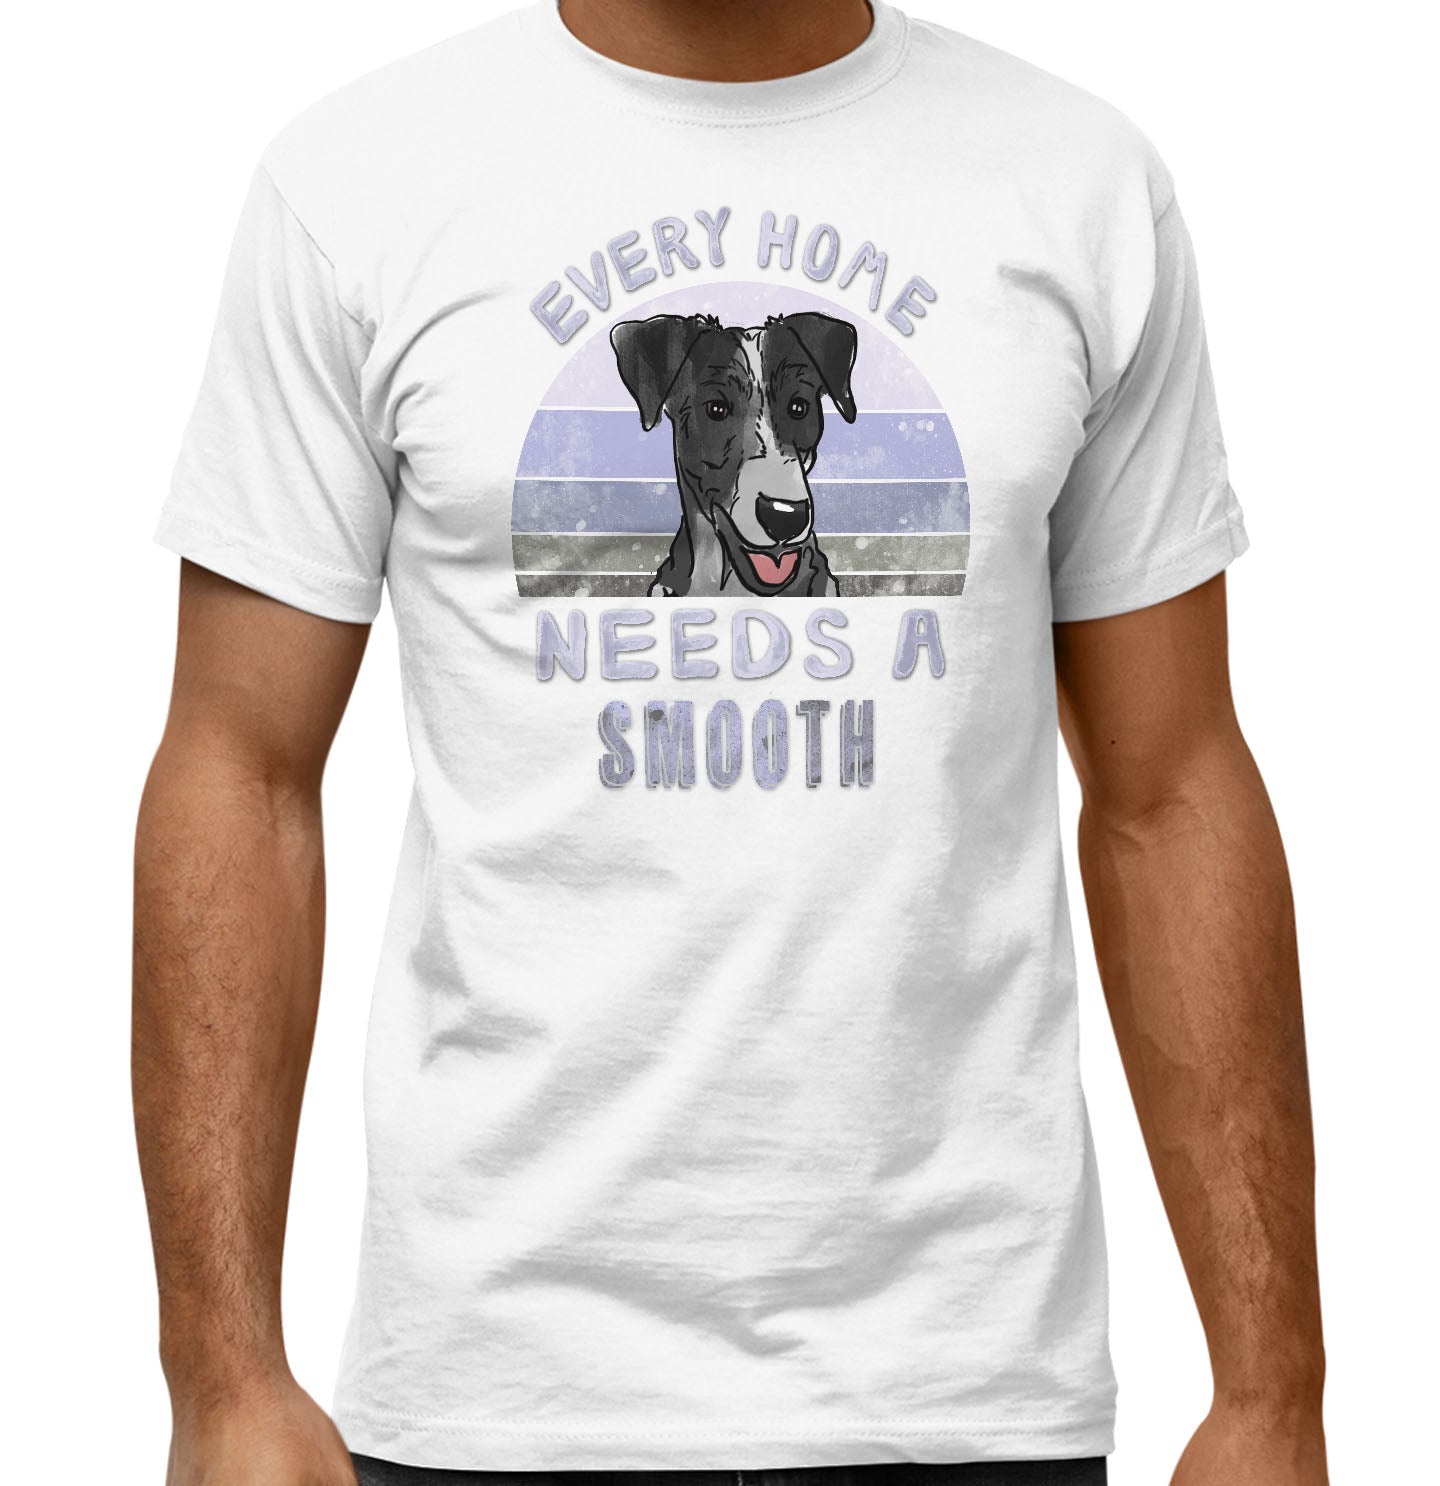 Every Home Needs a Smooth Fox Terrier - Adult Unisex T-Shirt